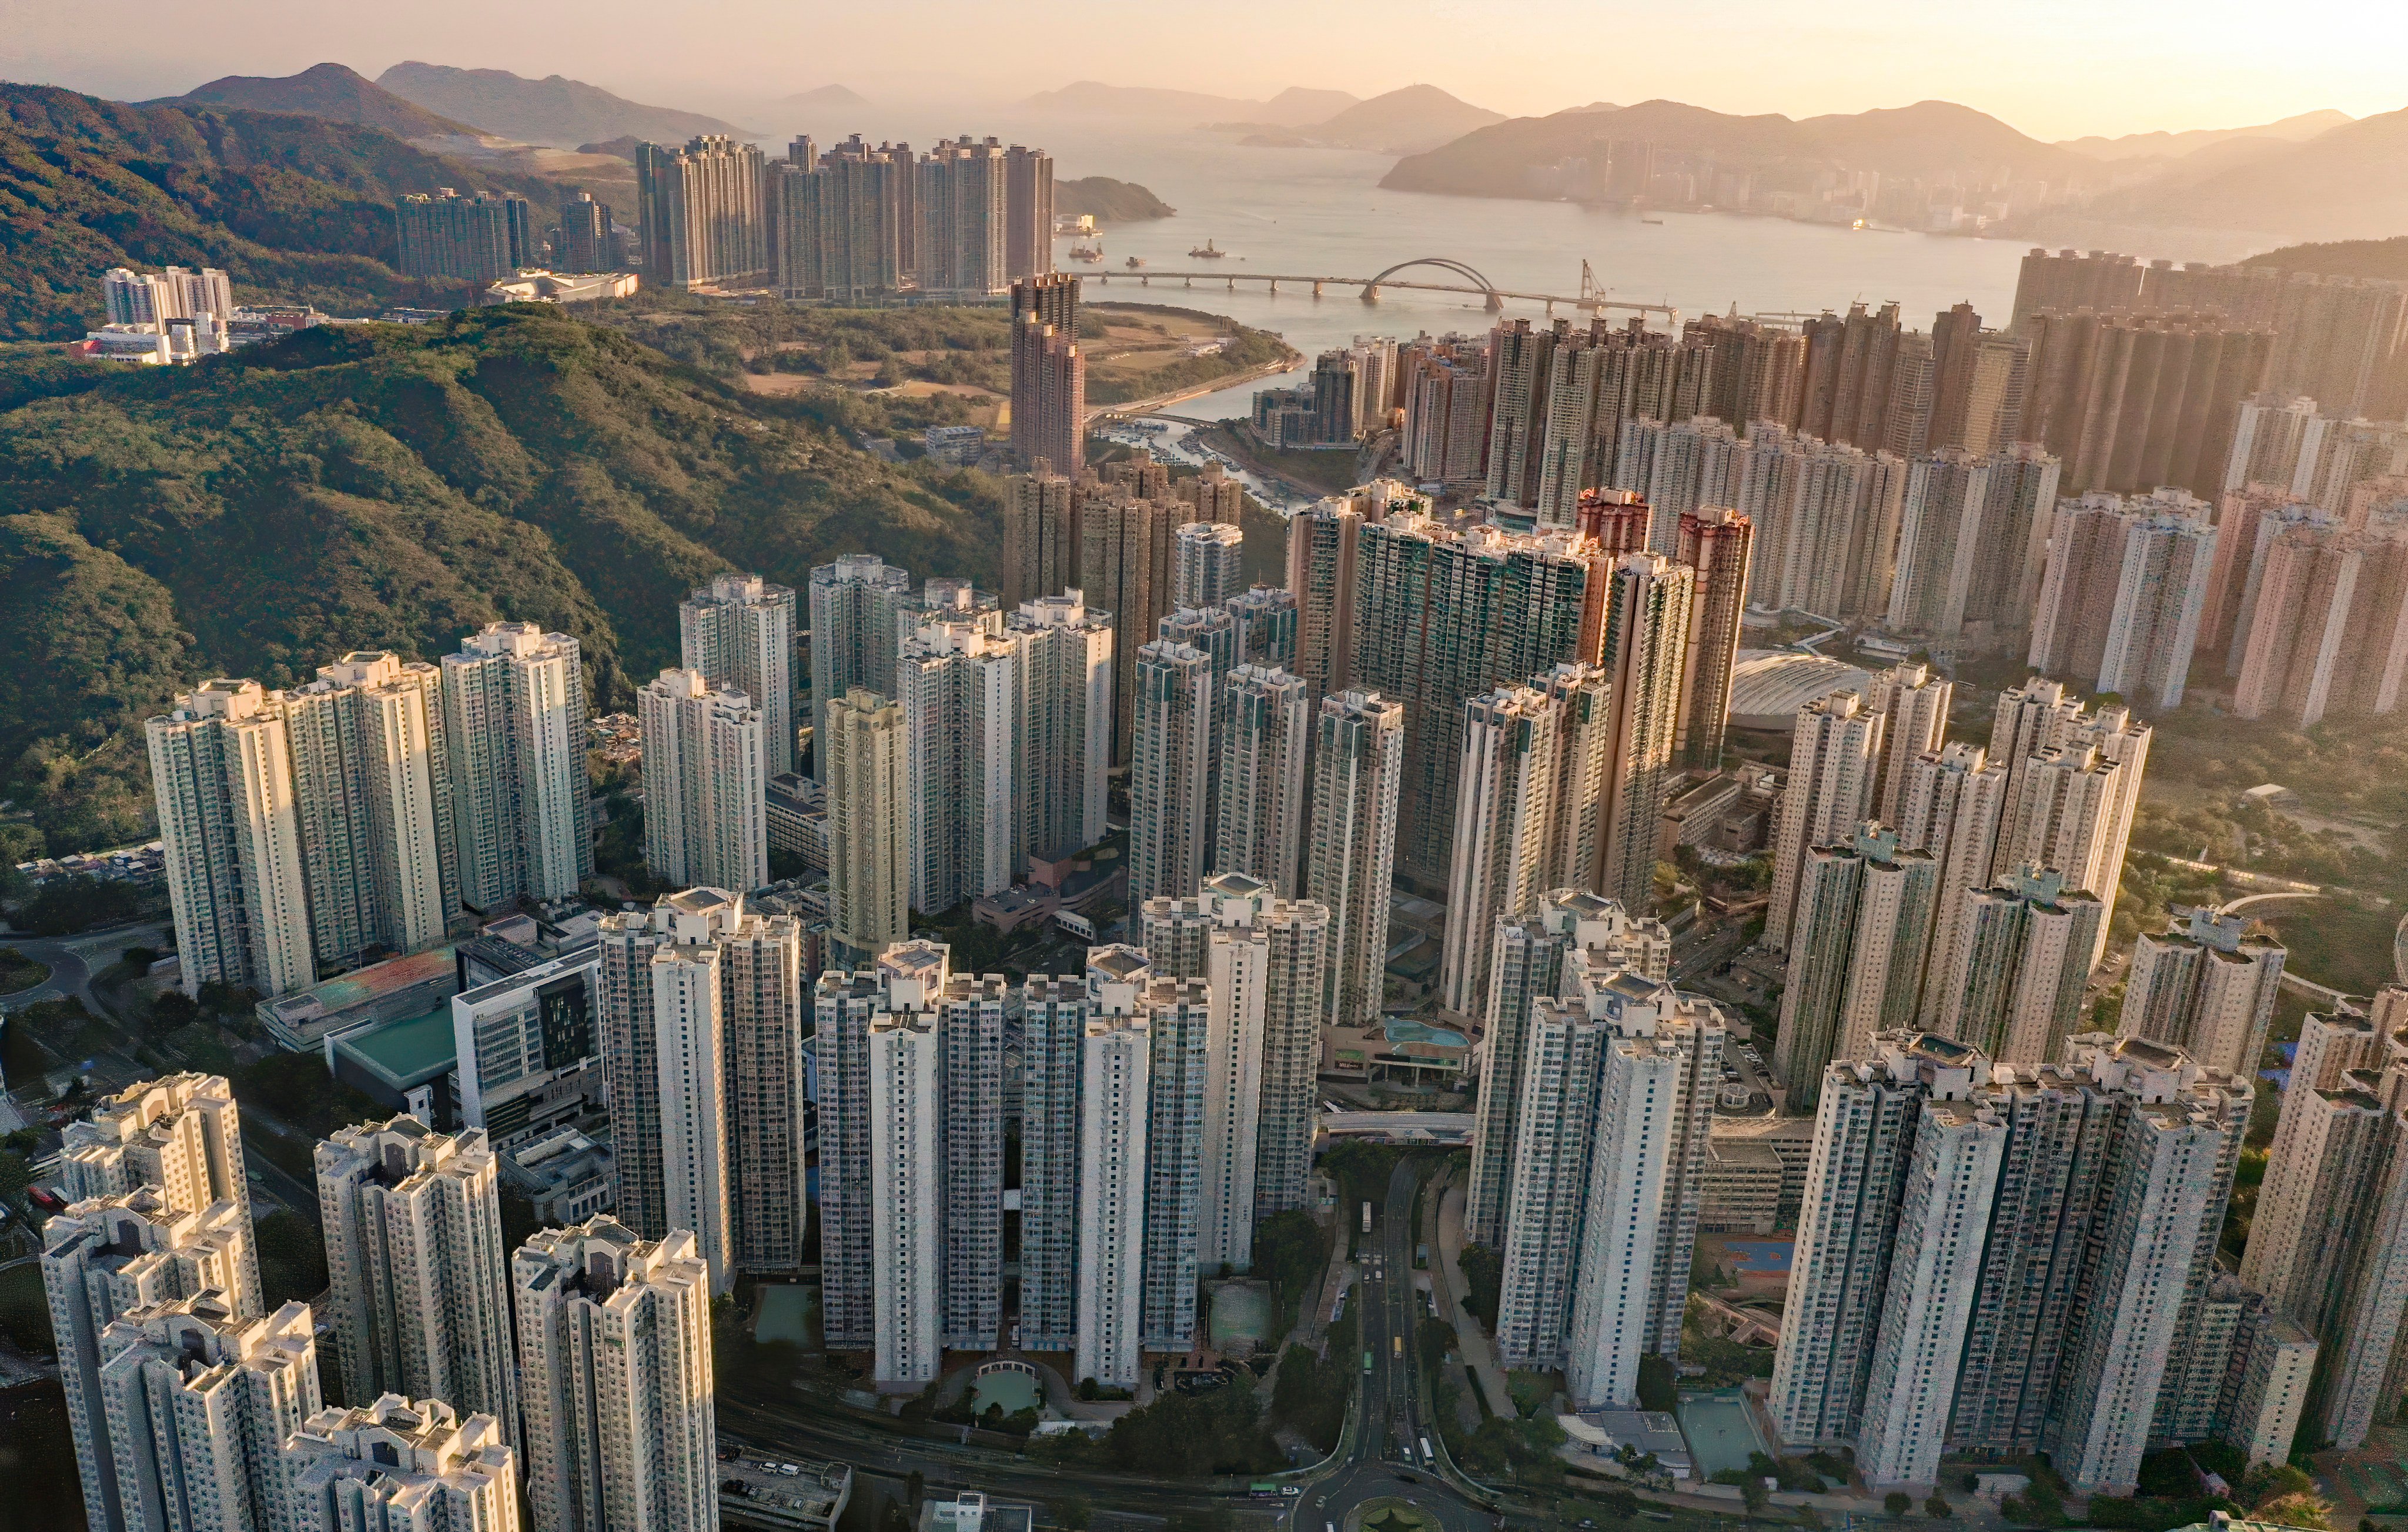 The government has launched a new public-private scheme designed to help ease the housing shortage. Photo: Dickson Lee